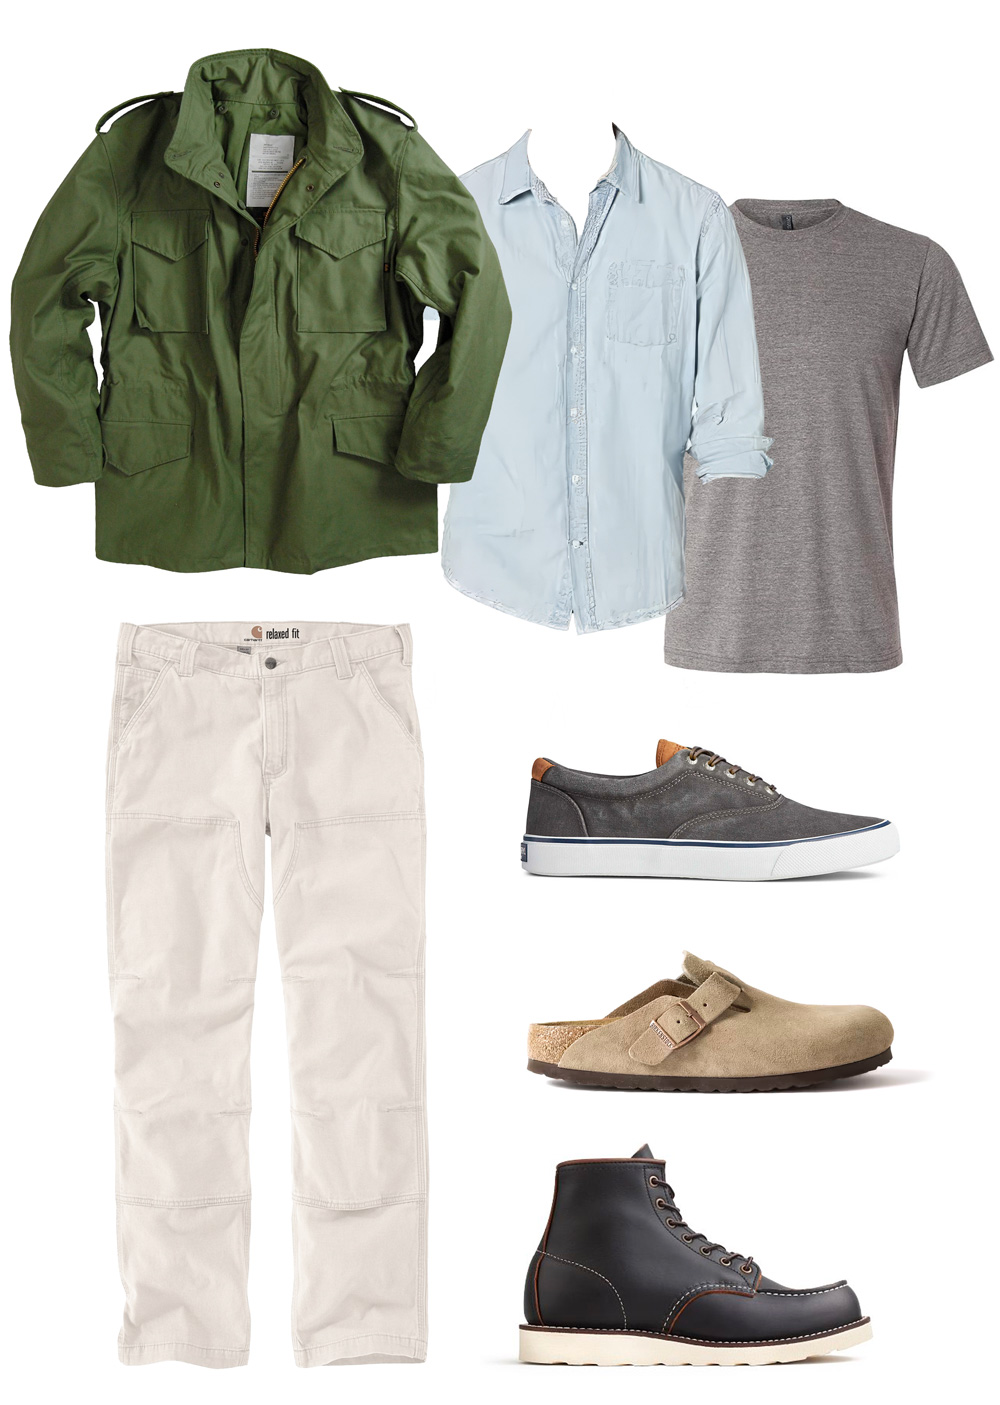 collage of men's fall outfit idea with m65 olive green jacket, blue chambray shirt, gray tshirt, white utility pants and option of sneakers, birkenstocks, or red wing boots